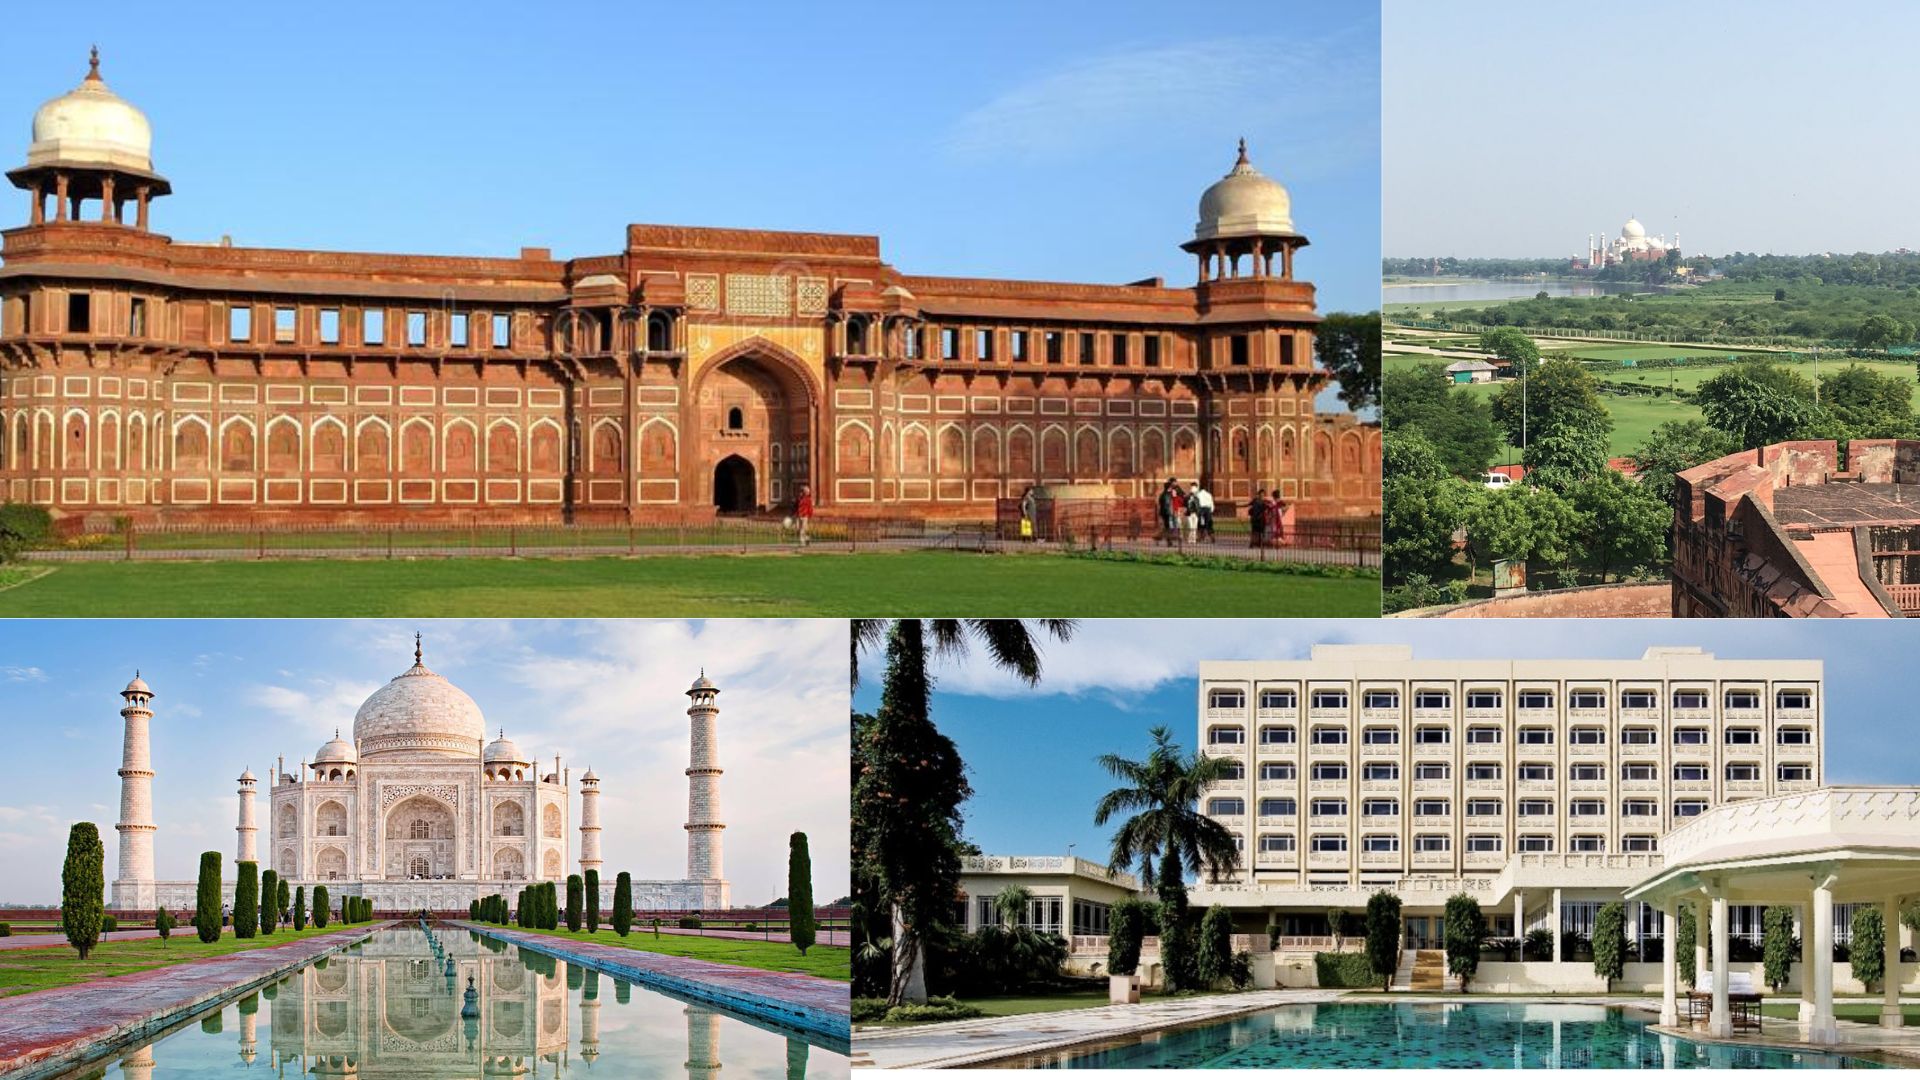 About and History of Agra